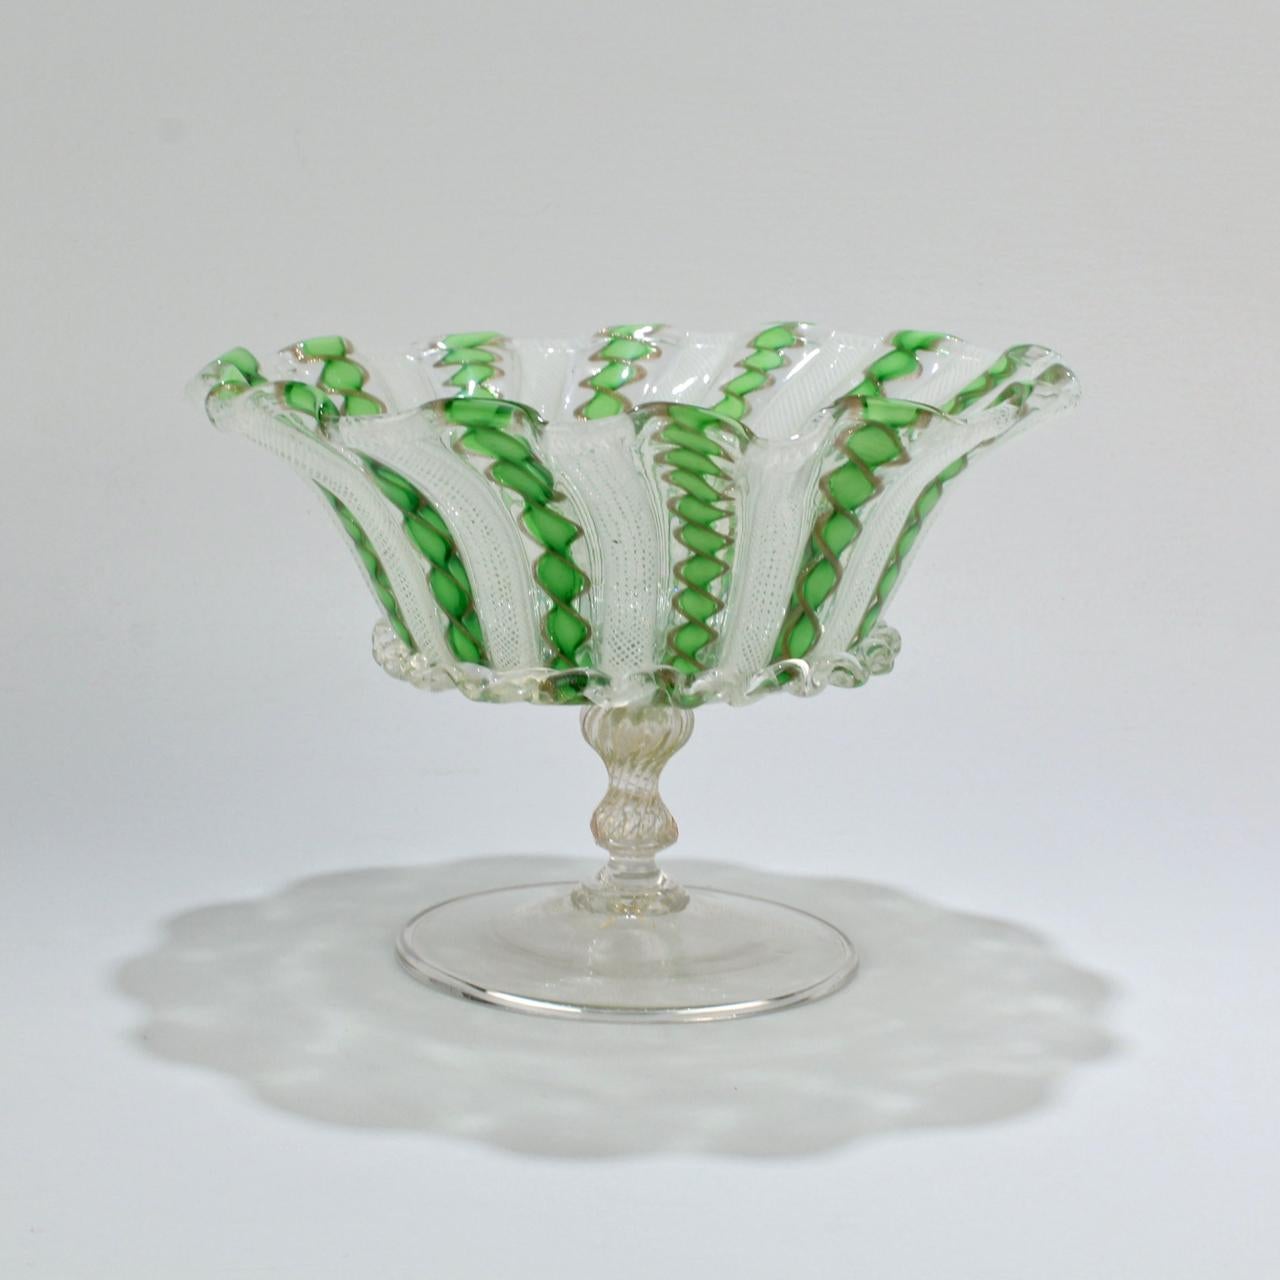 A fine Venetian glass footed bowl or compote.

With green, white, and copper color latticinio bands. The central bowl decorated with a rigaree band and supported by a blown pedestal and delicate wafer foot with inclusions.

A wonderful, delicate